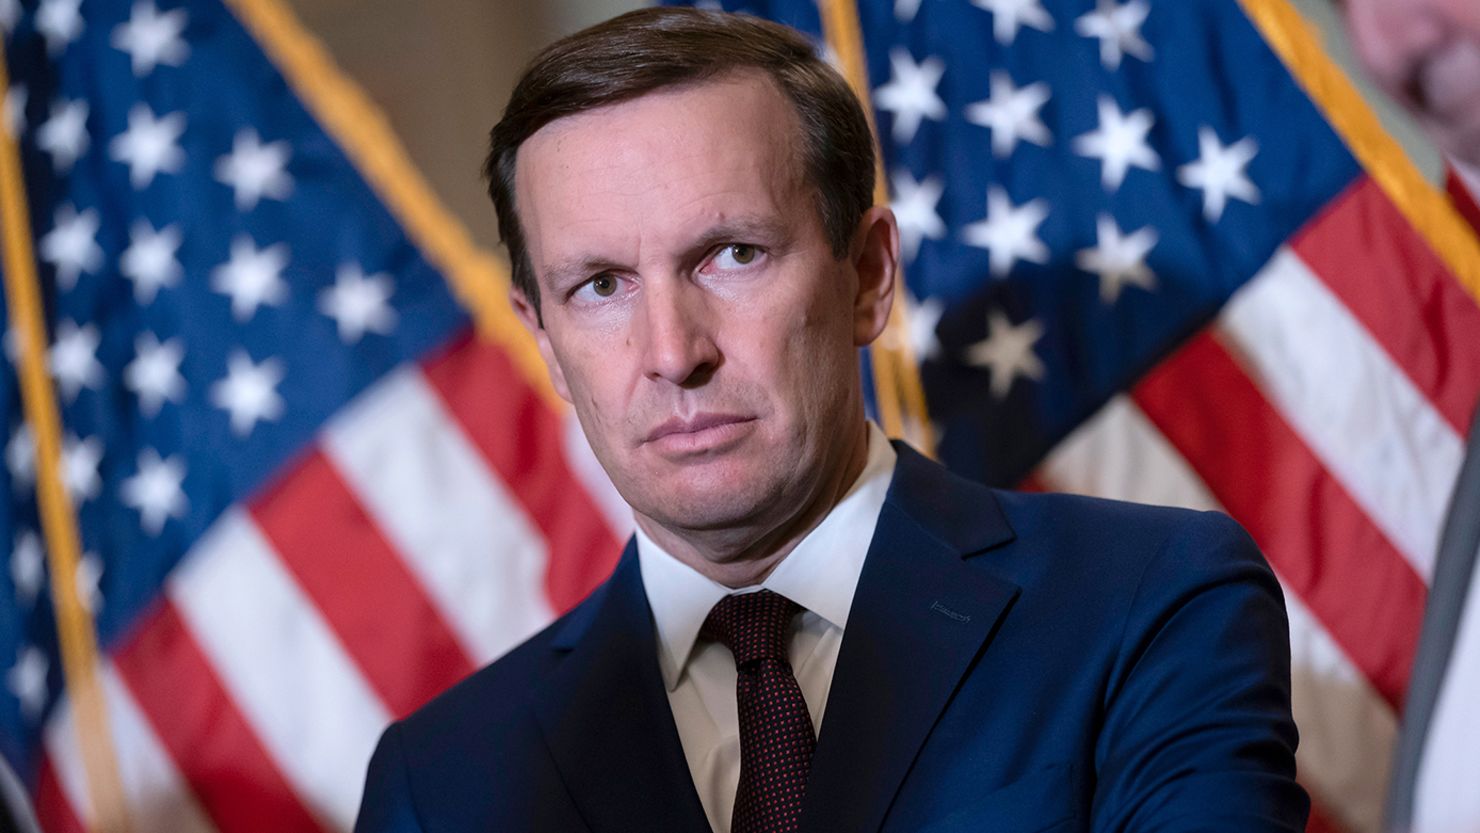 Sen. Chris Murphy waits to speak to reporters outside the chamber to answer questions about his efforts to reach a bipartisan Senate agreement to rein in gun violence at the Capitol in Washington on Tuesday, June 14, 2022.